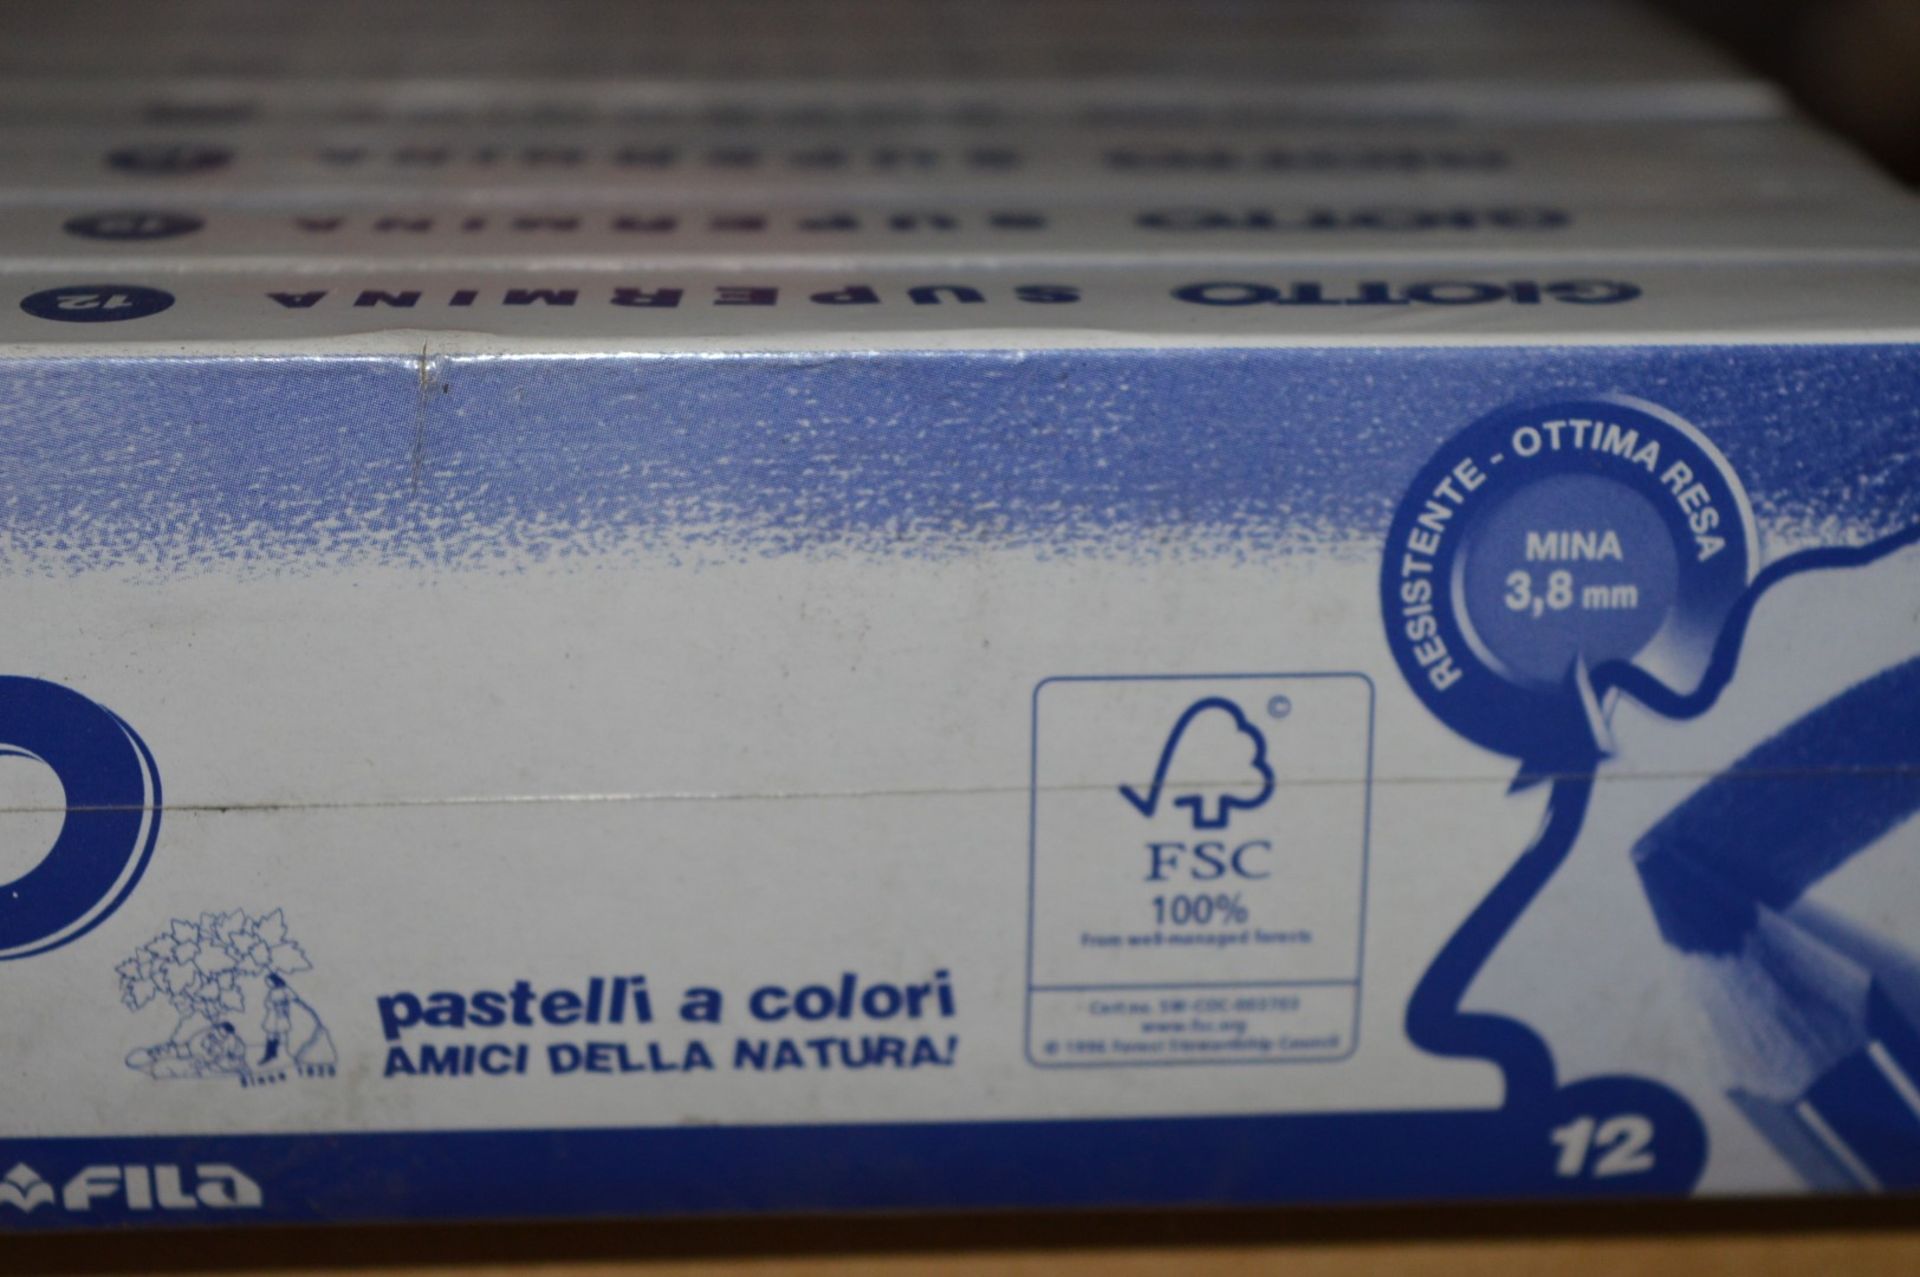 36 x Packs of Giotto Supermina 3.8mm Blue Pencils - High Quality Pencils Packed in Boxes of 12 - - Image 4 of 10